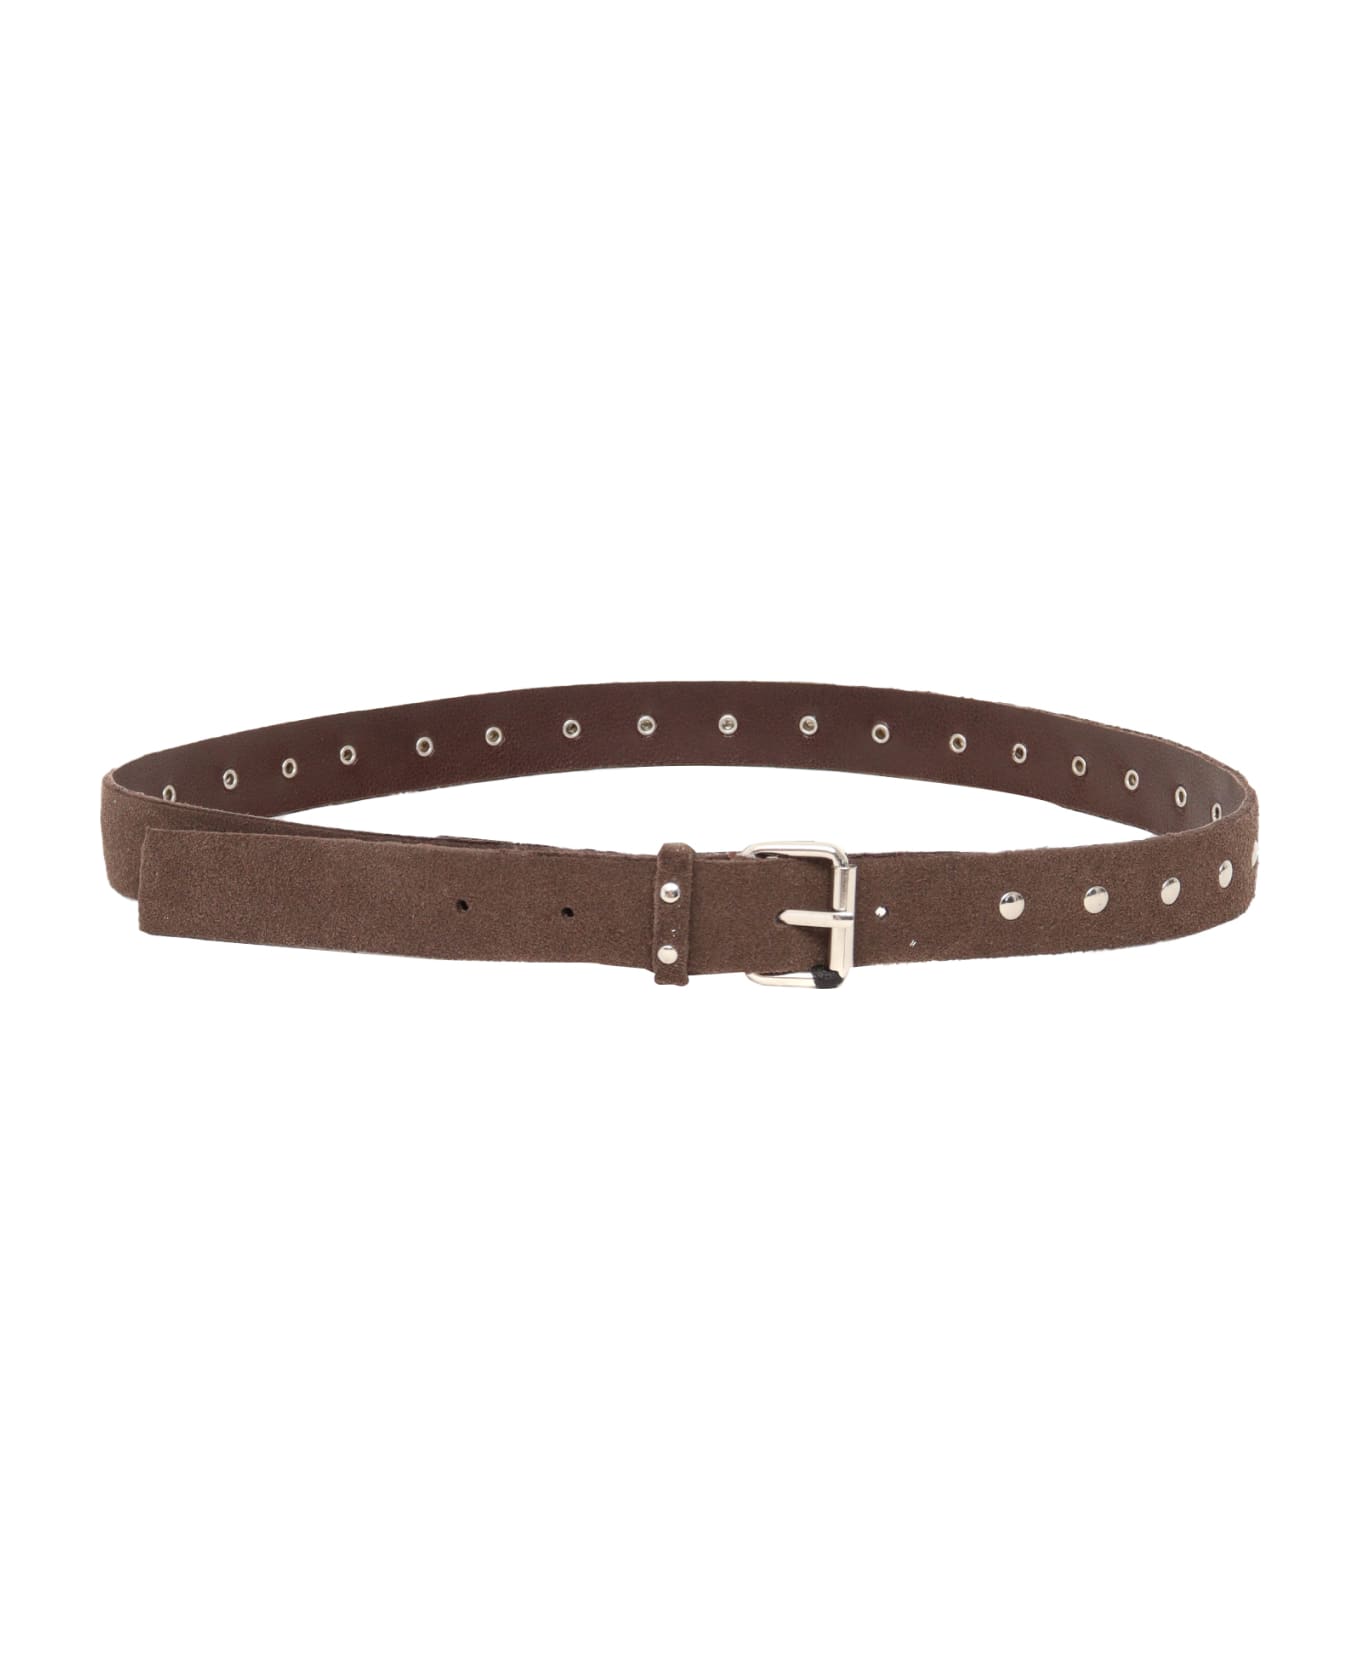 Paolo Pecora Studded Belt - BROWN アクセサリー＆ギフト